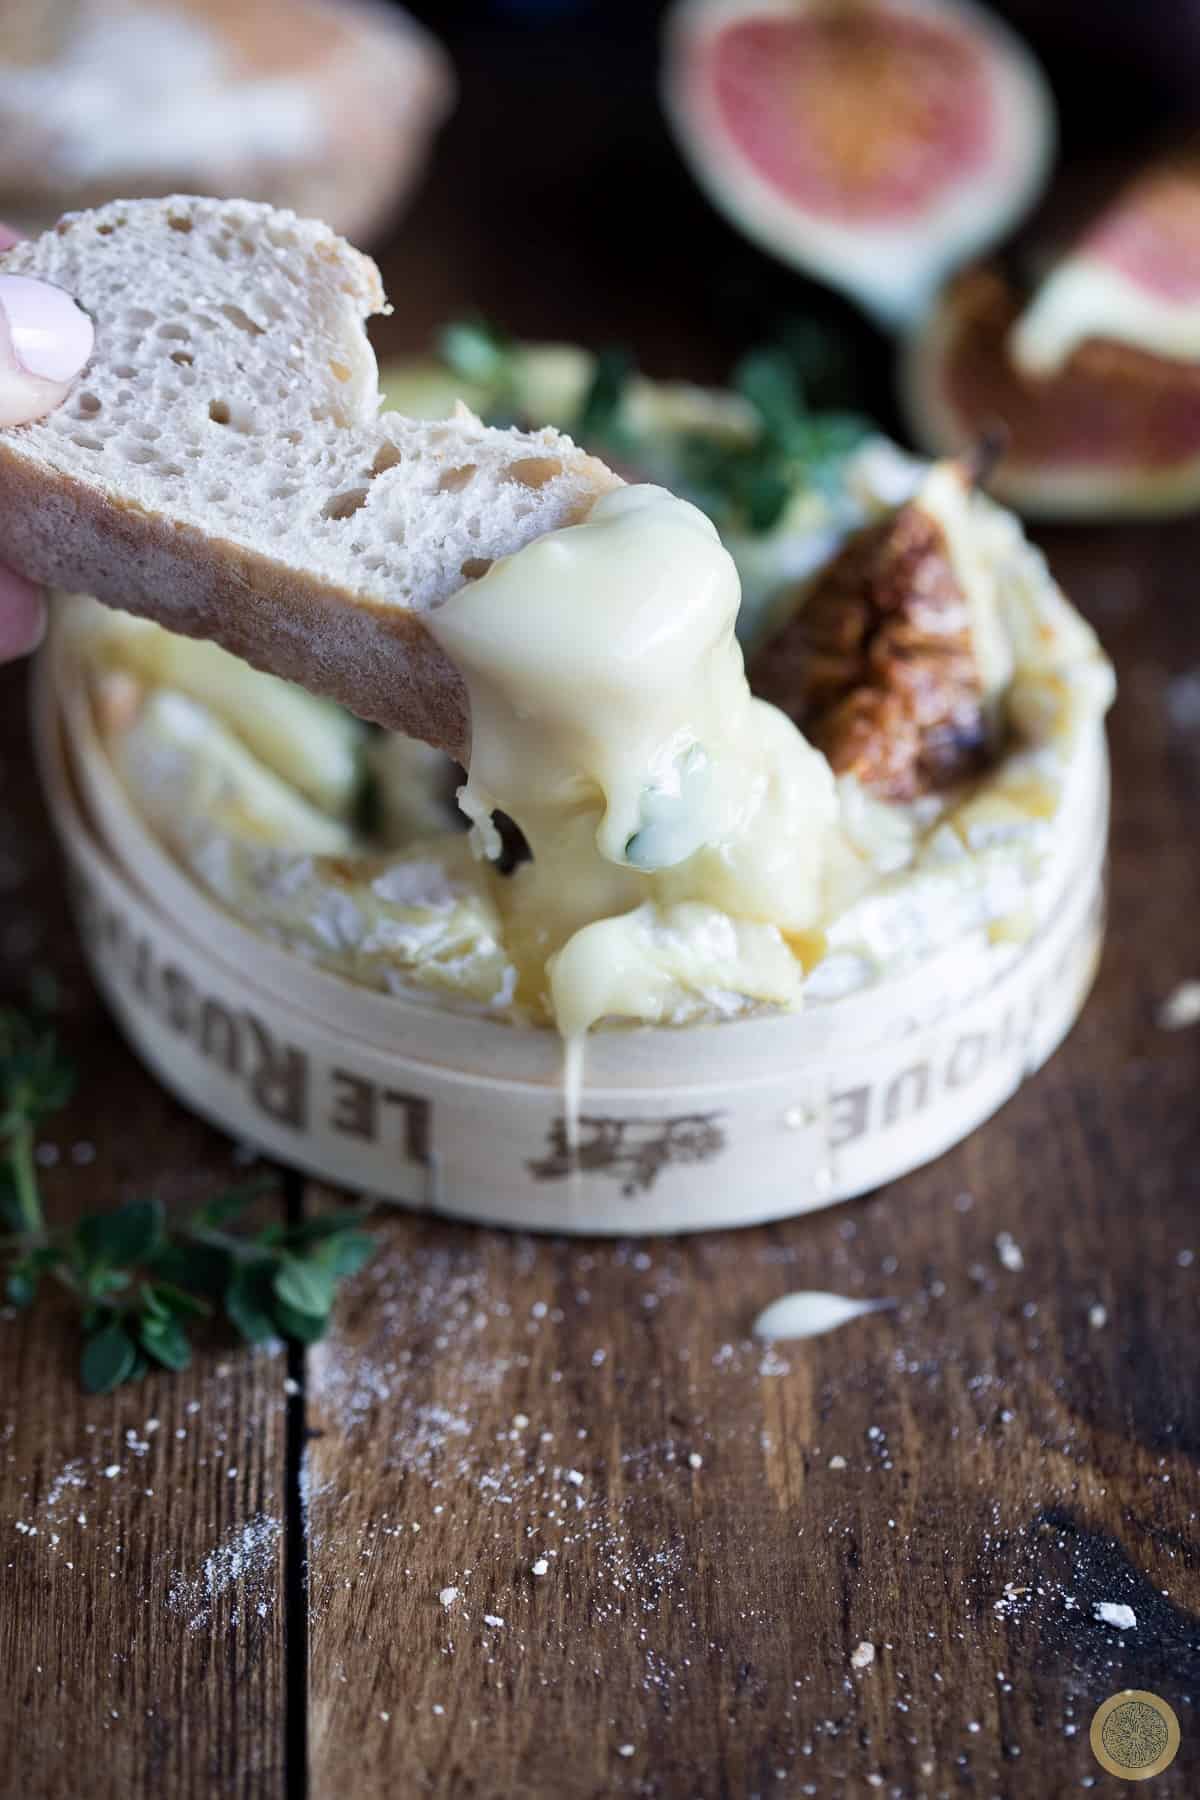 What can you dip in melted Camembert?